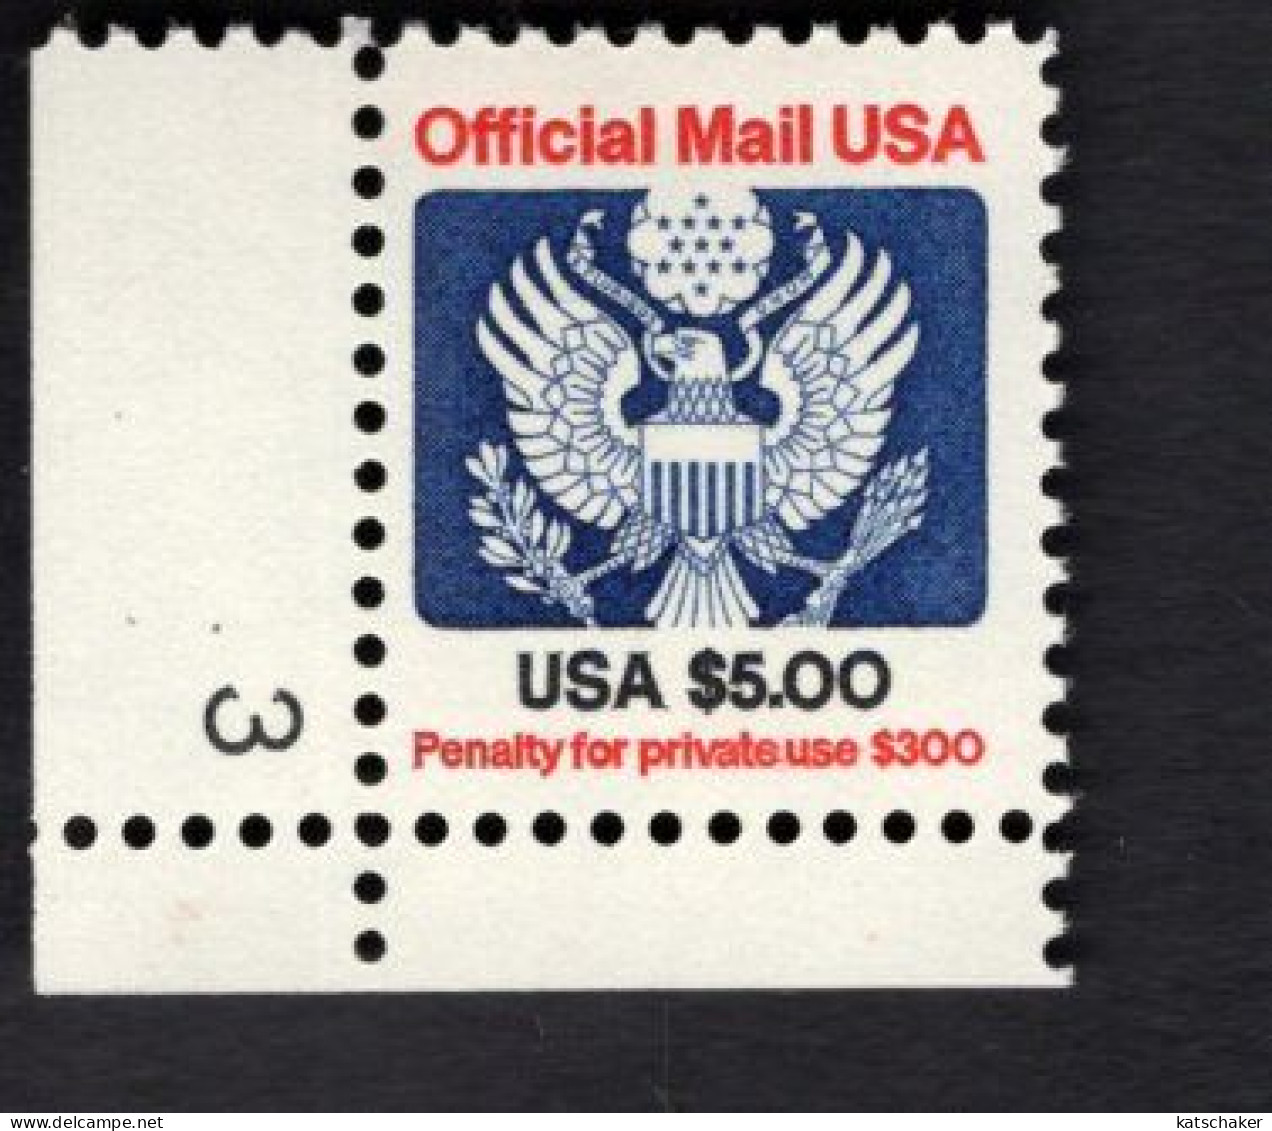 2008964903 1983 (XX) SCOTT O133 POSTFRIS MINT NEVER HINGED  Eagle And Shield Bird Vogel OFFICIAL MAIL PLATE 3 - Officials